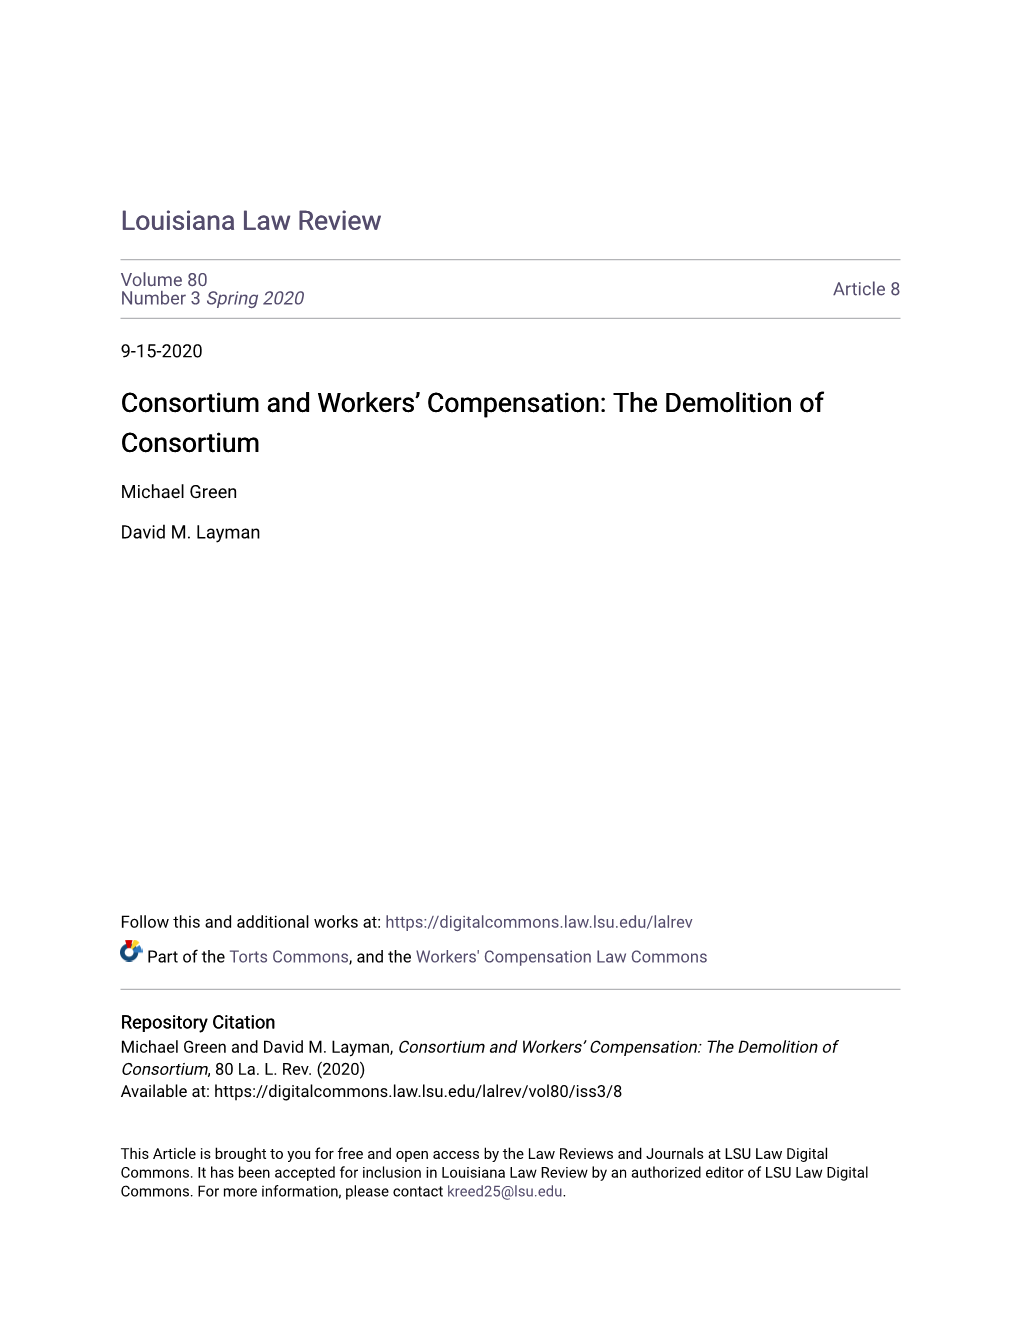 Consortium and Workers' Compensation: the Demolition of Consortium